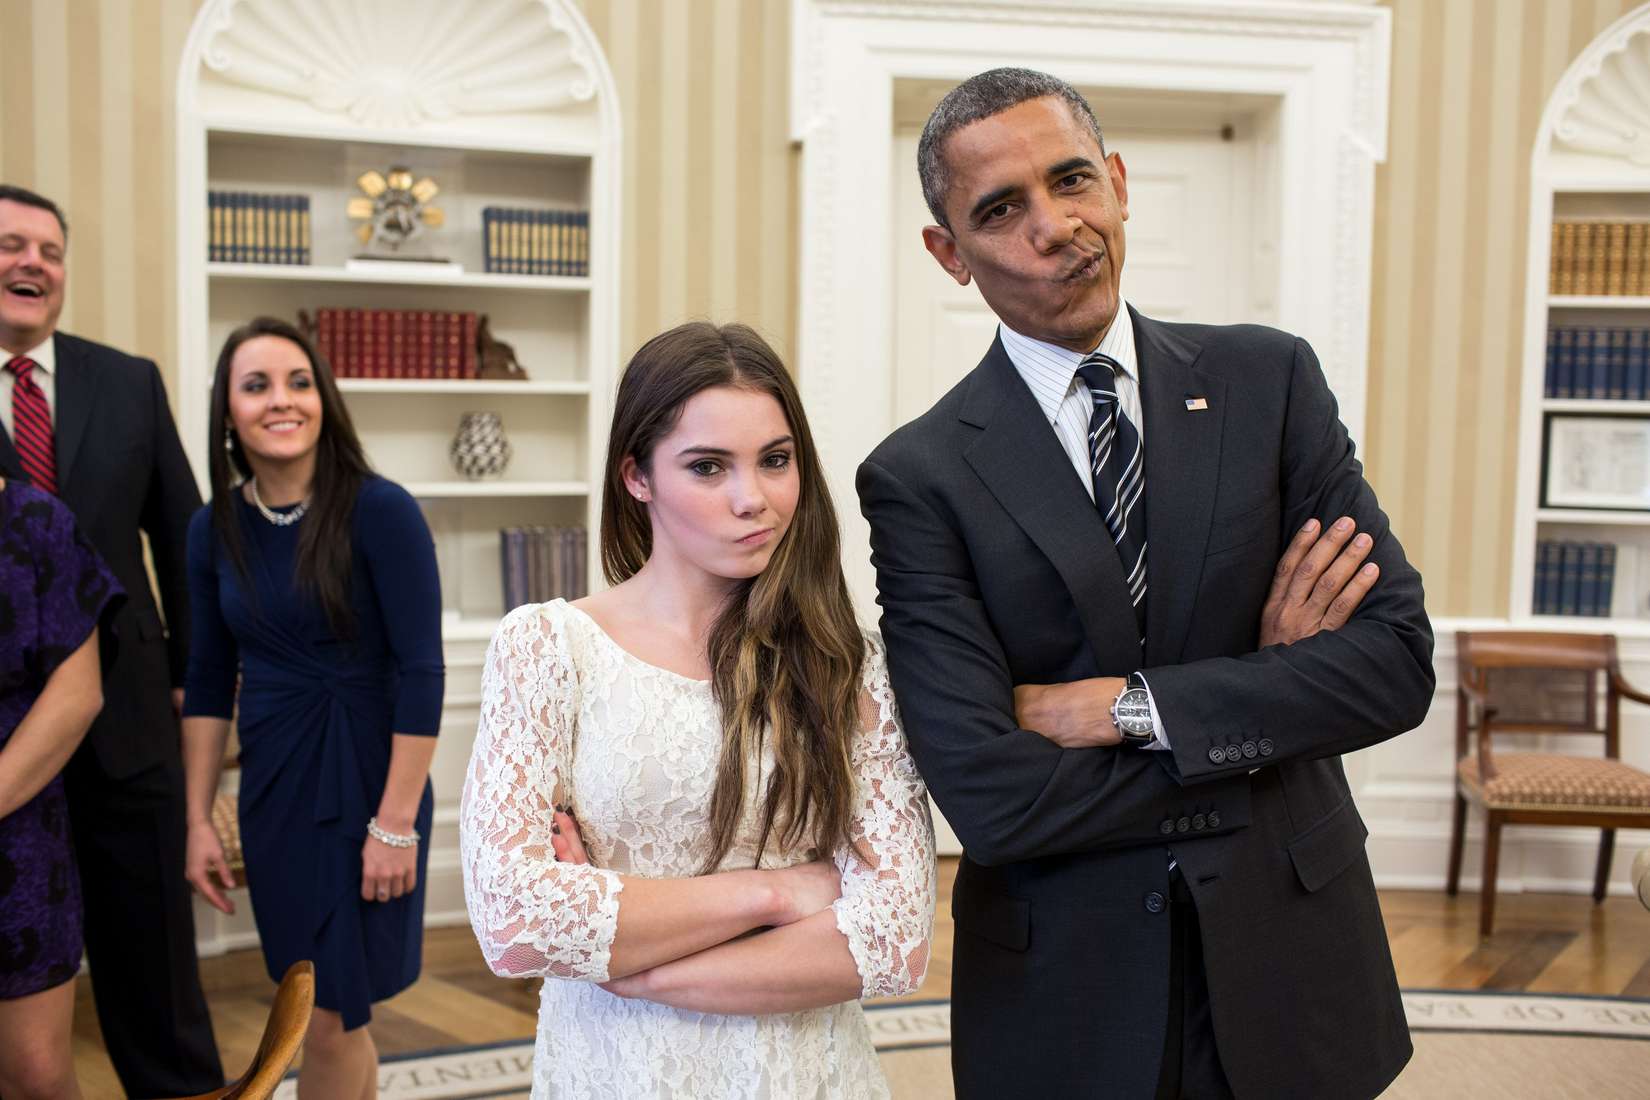 McKayla Maroney and Obama with Kyla Ross, Aly Raisman, and Jordyn Wieber at The White House in Washington, DC